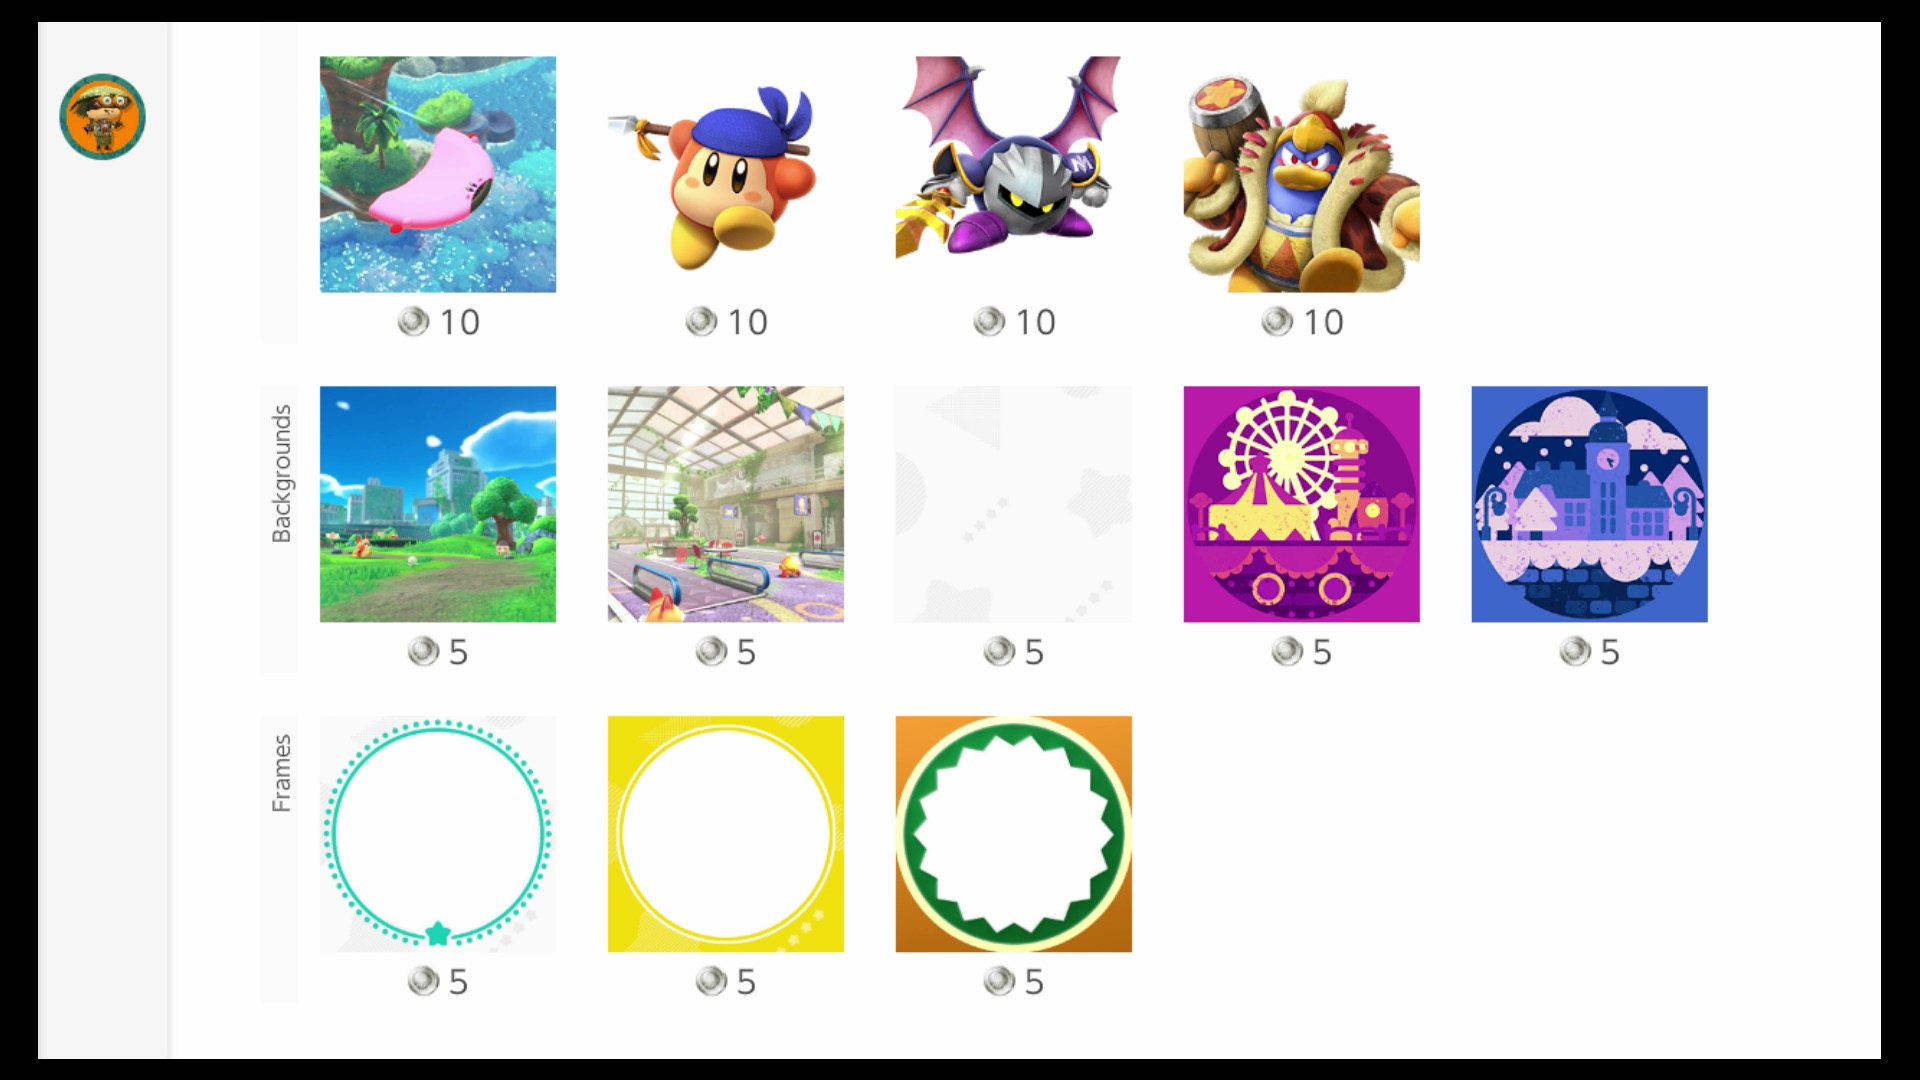 Kirby and the Forgotten Land user icons added to Nintendo Switch